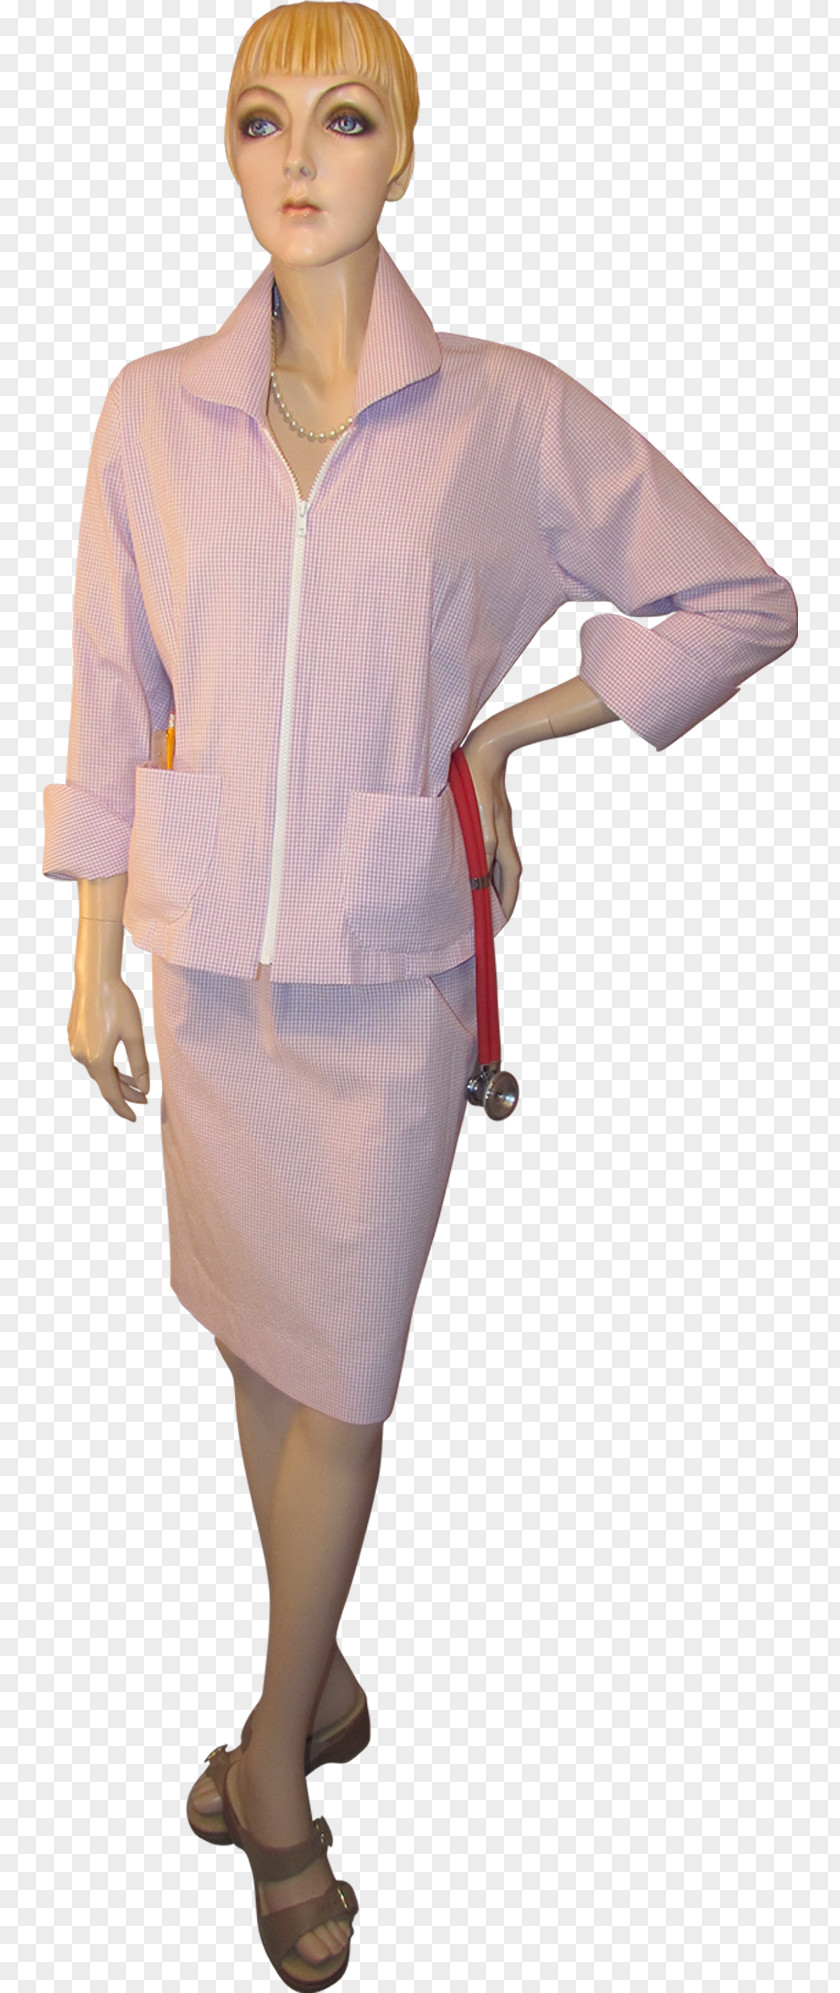 Costume Pink M Outerwear Uniform Top PNG